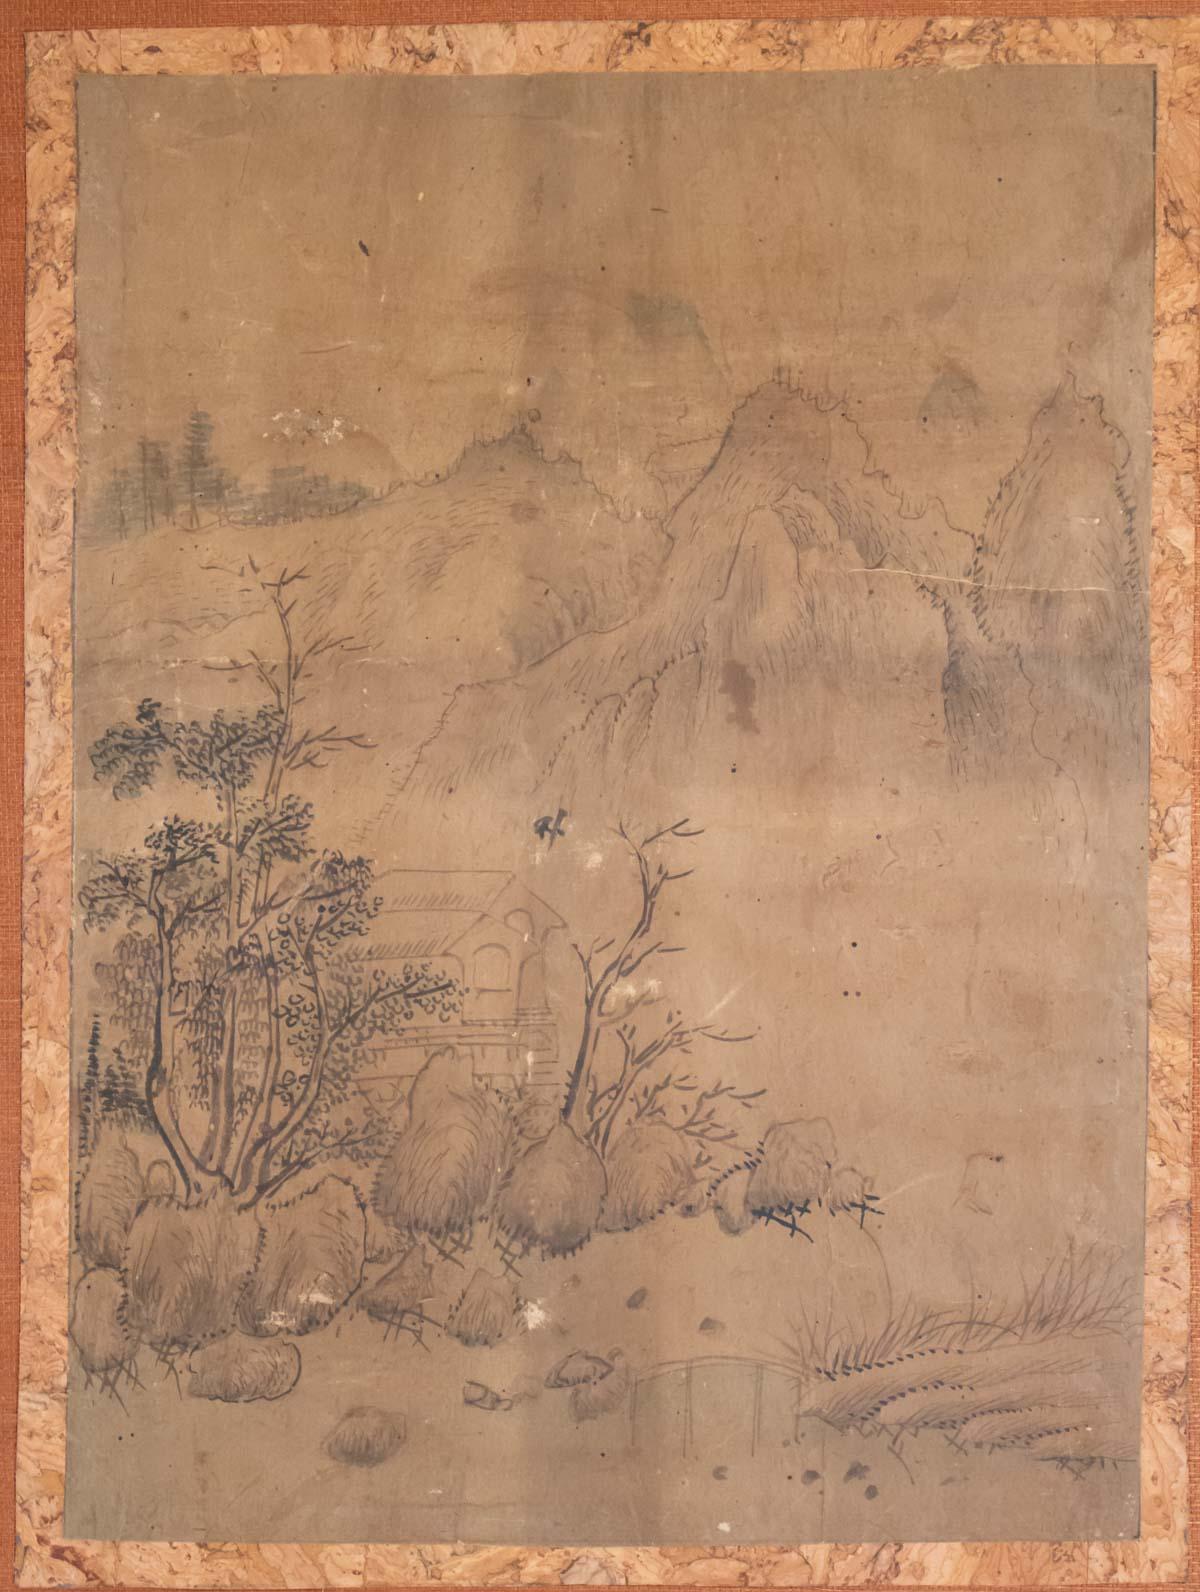 Drawing, China, 19th century on paper, Art Asia
Drawing Measures: H 33.5cm, W 24.5cm
Carton H 50.5cm, W 41.5cm